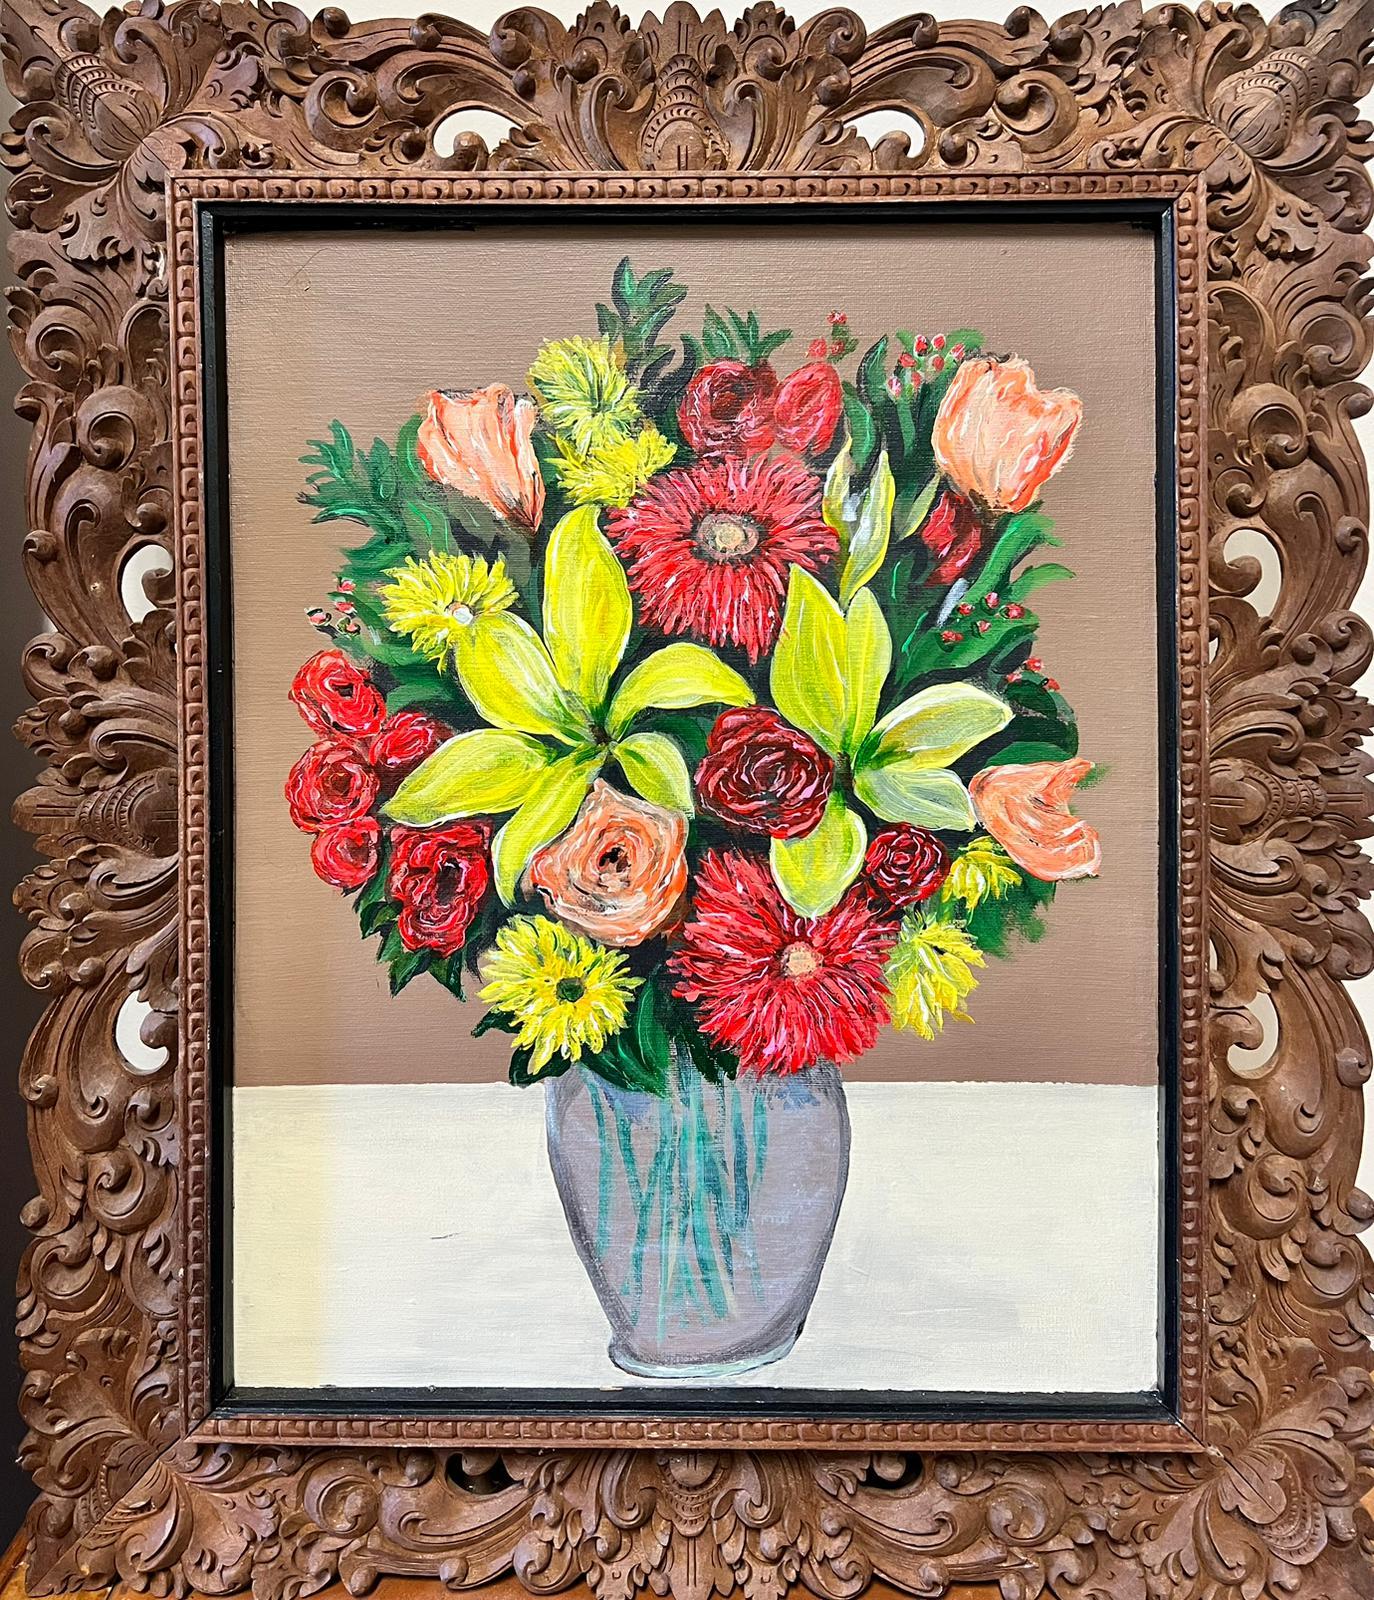 Contemporary British  Interior Painting - Modernist Still Life Flowers in Vase Oil Painting in Beautiful Florentine Frame